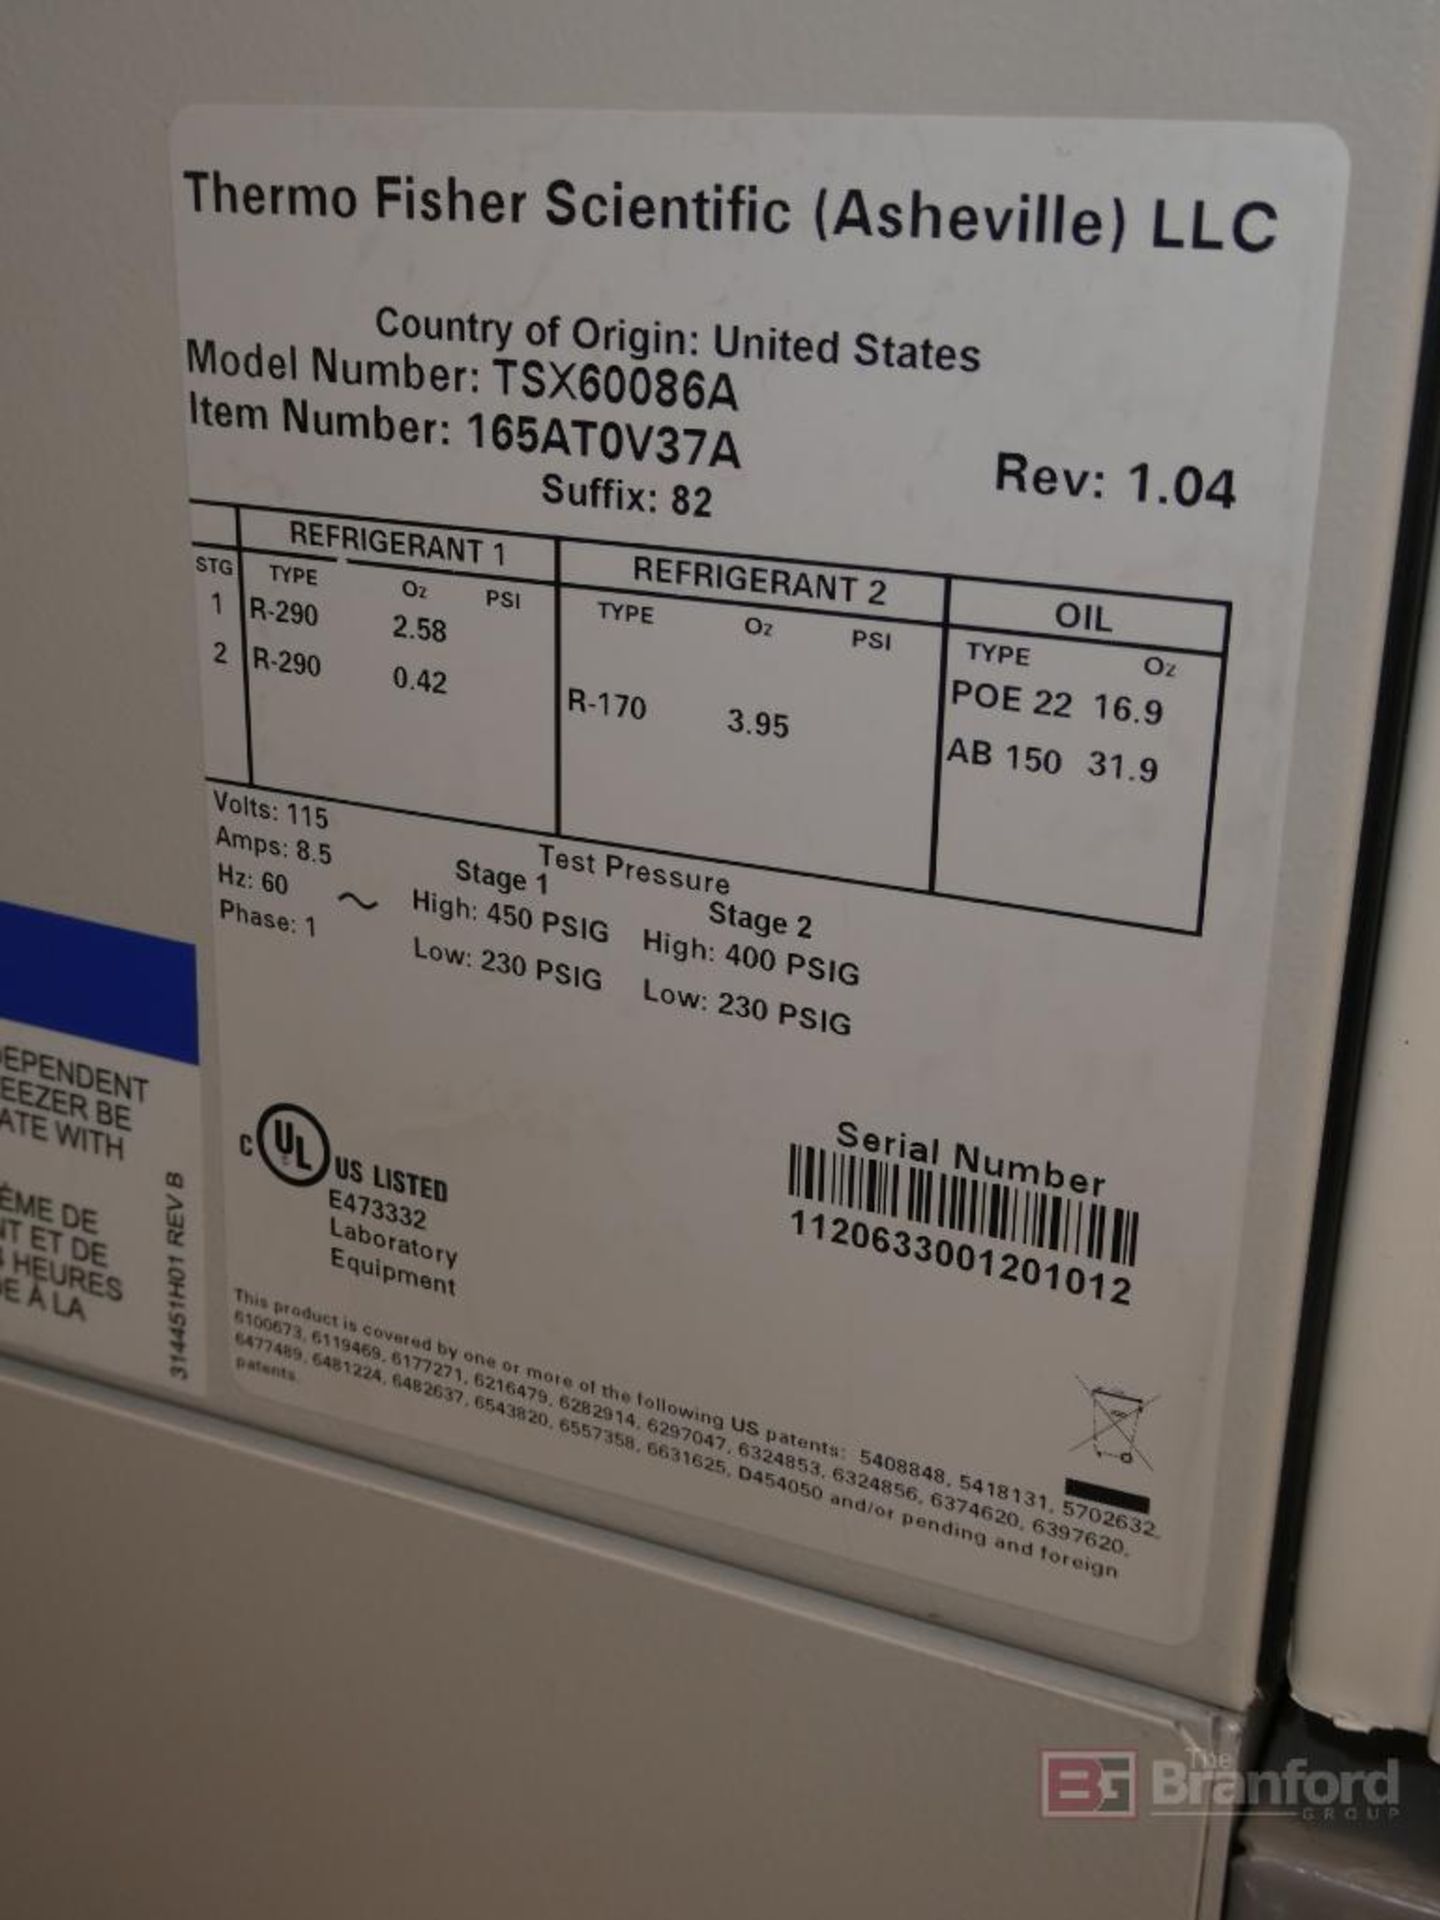 ThermoFisher Scientific Model TSX60086A, TSX Series Ultra-Low Single Door Freezer - Image 6 of 7